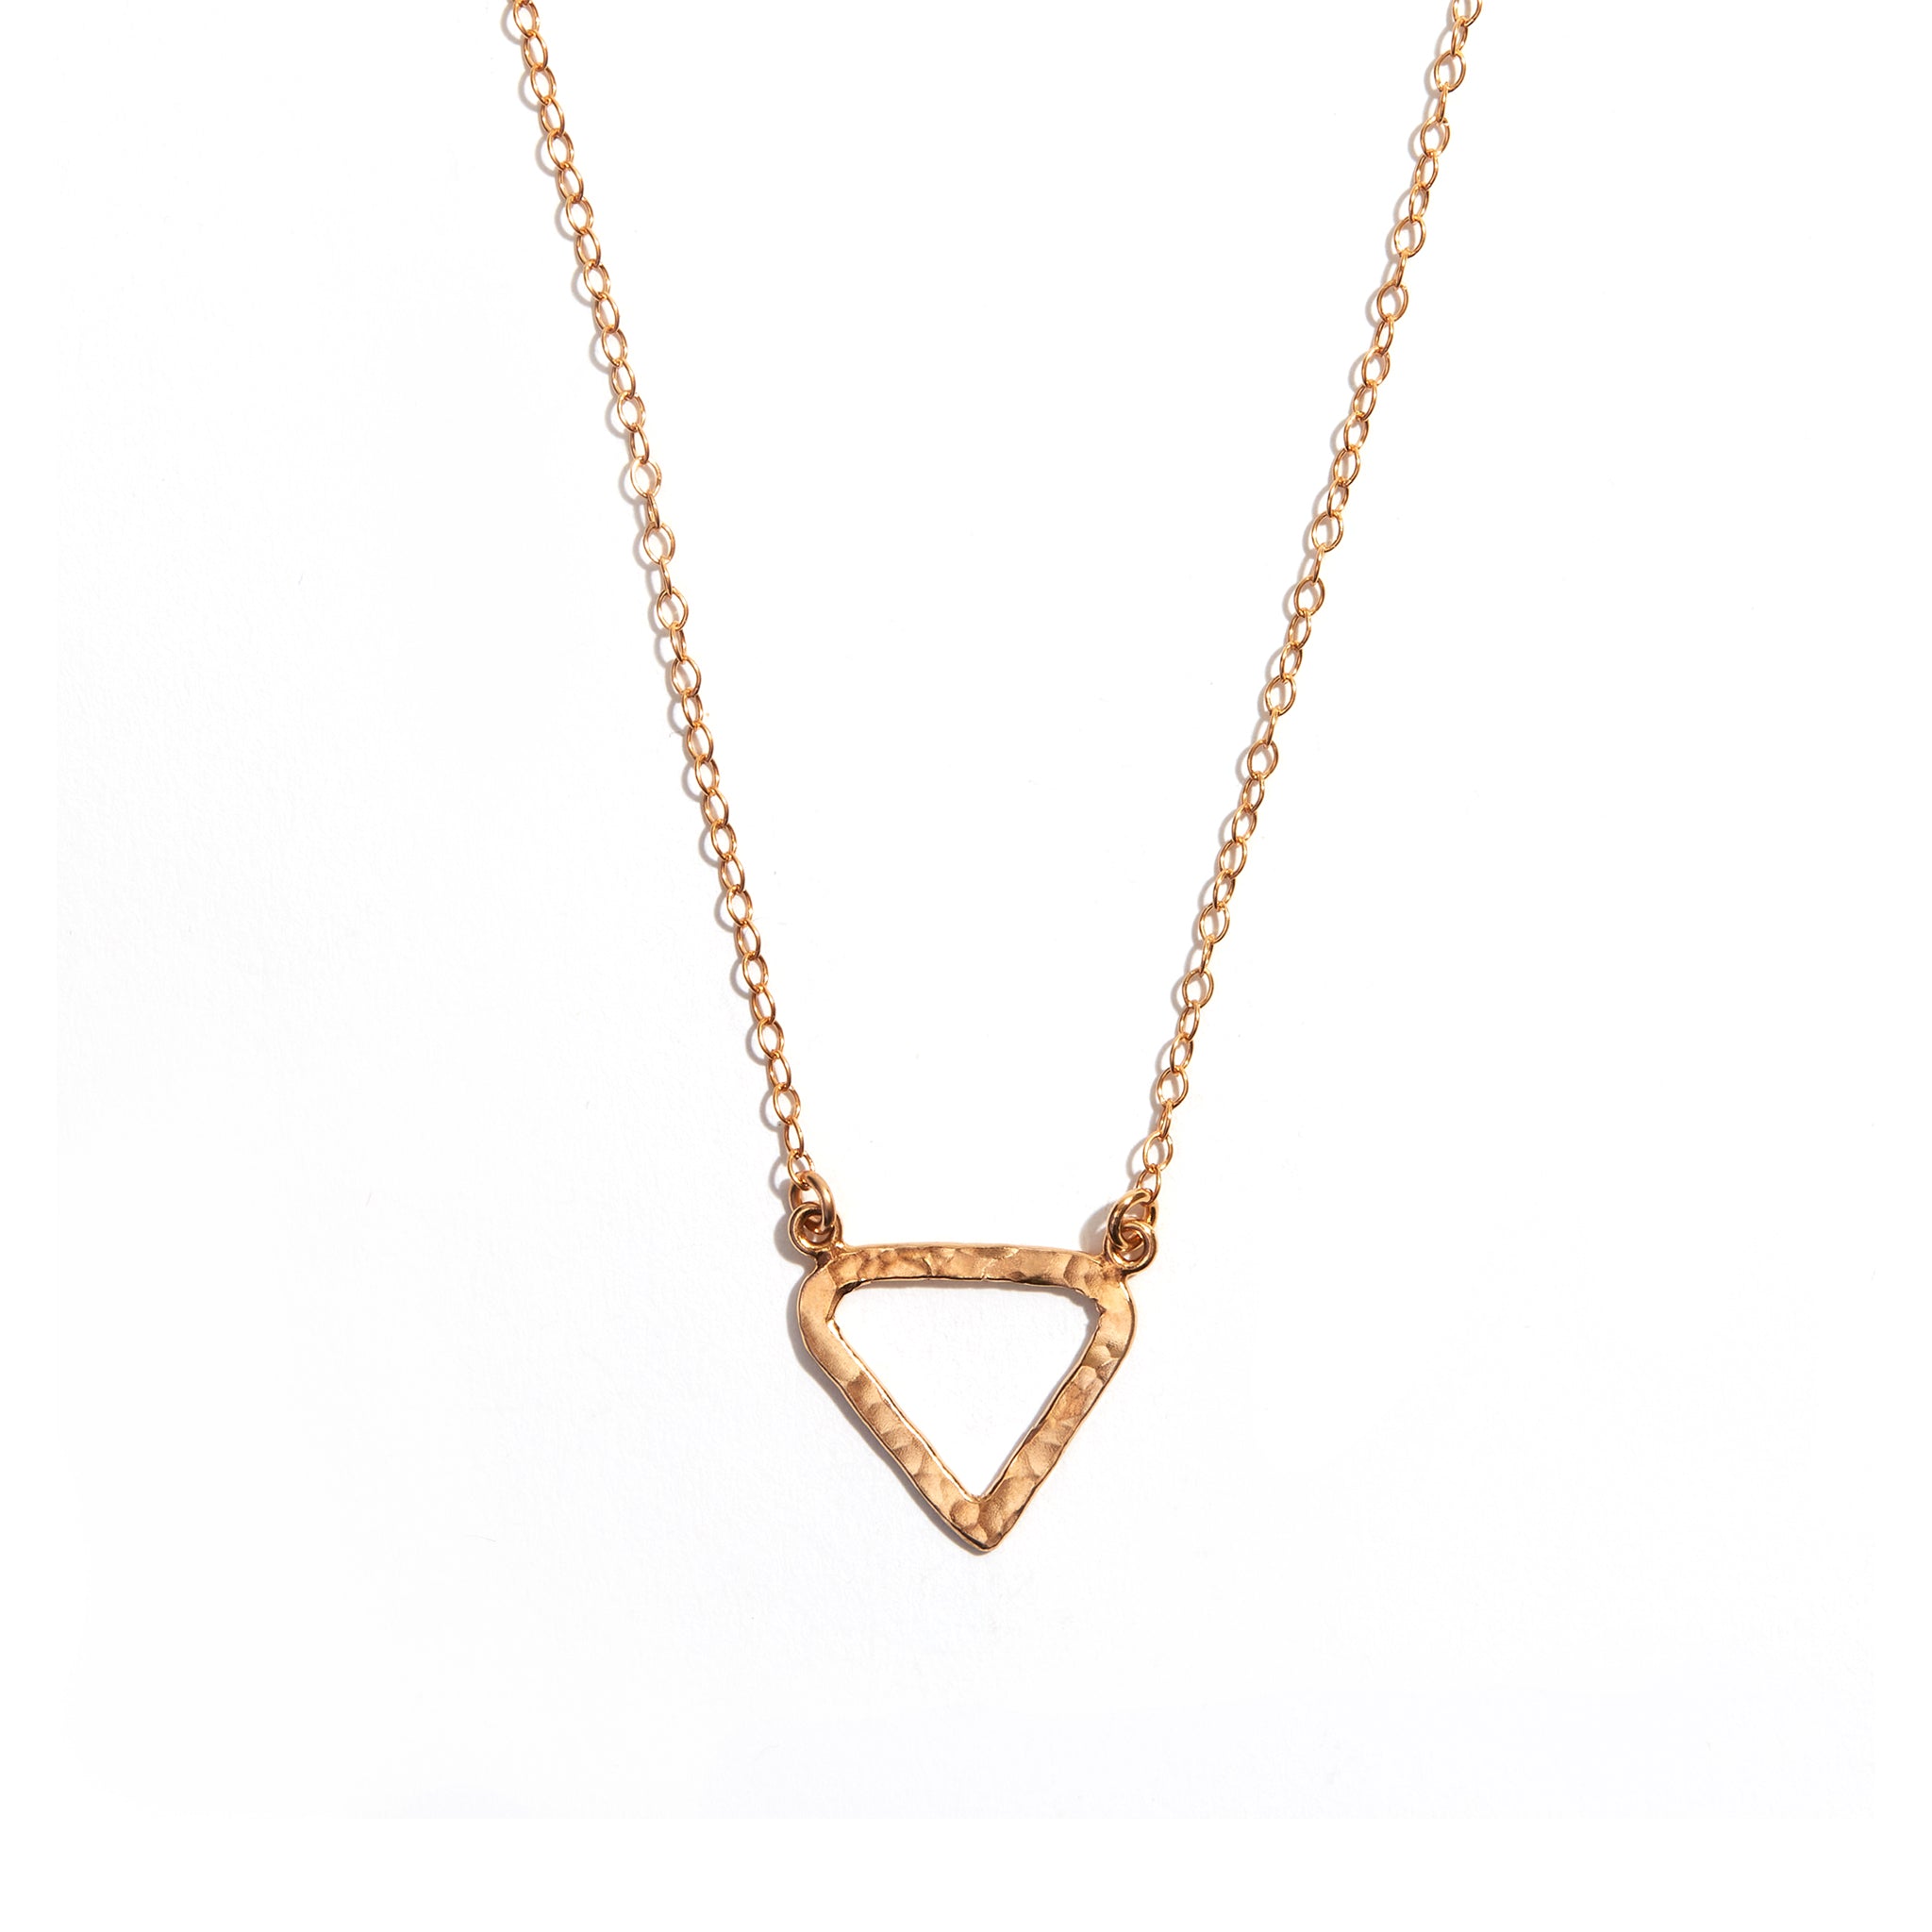 Photo of a gold triangle pendant made from 14 carat gold fill. A charming accesory ideal for gifting or adding a touch of elegance to any outfit.